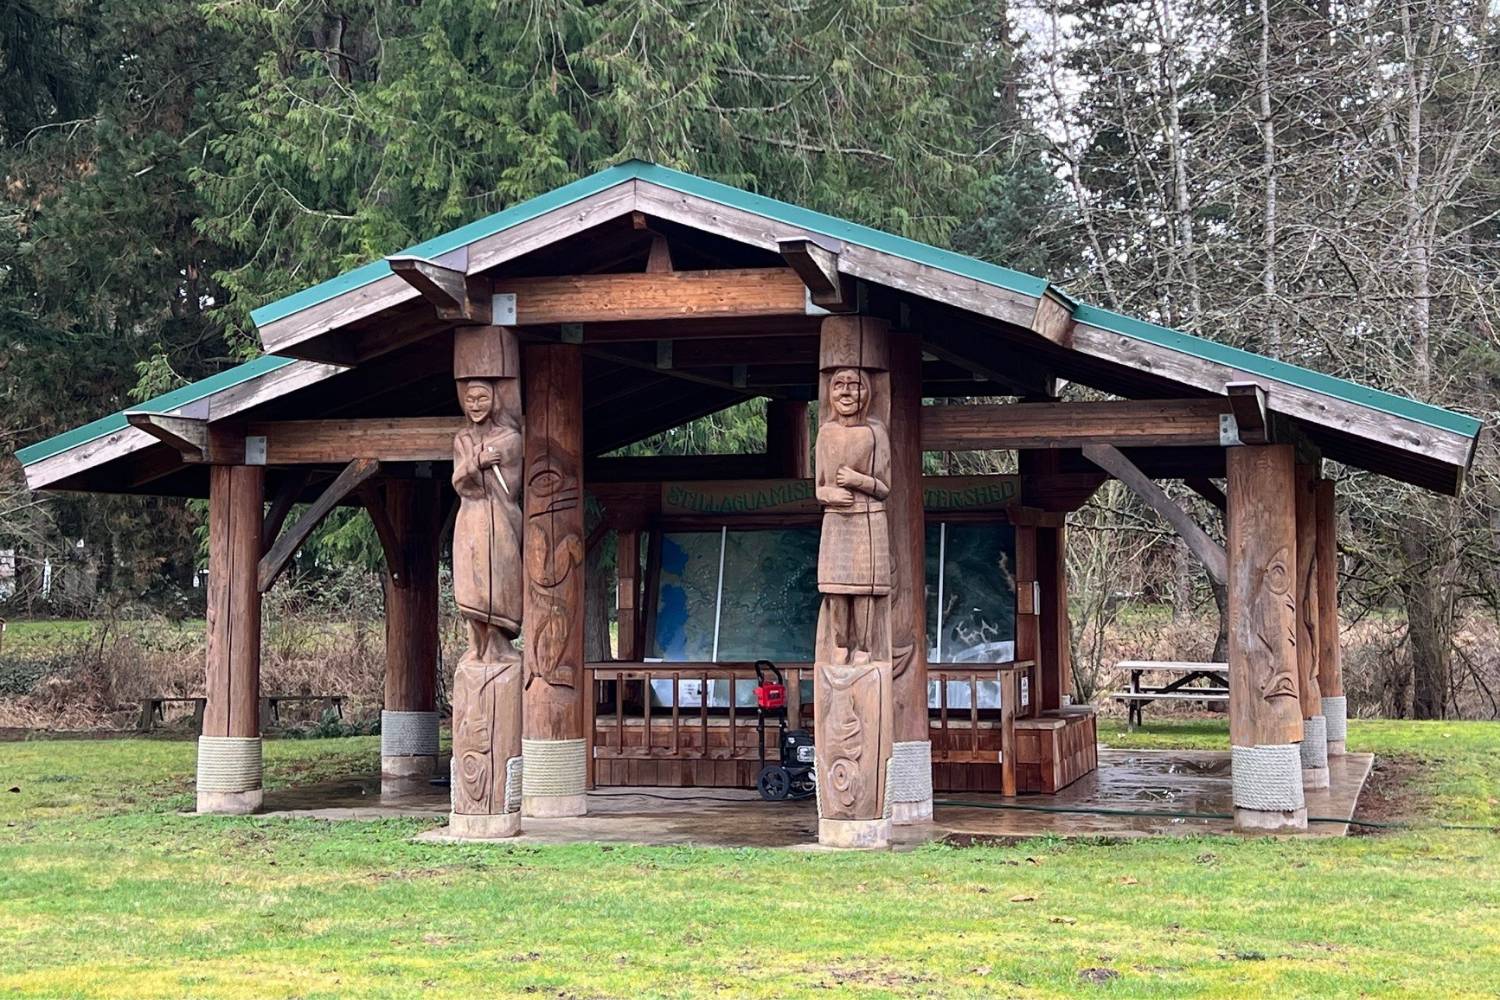 Photo shows a park and picnic area at the Stillaguamish Valley Pioneer Museum in Arlington